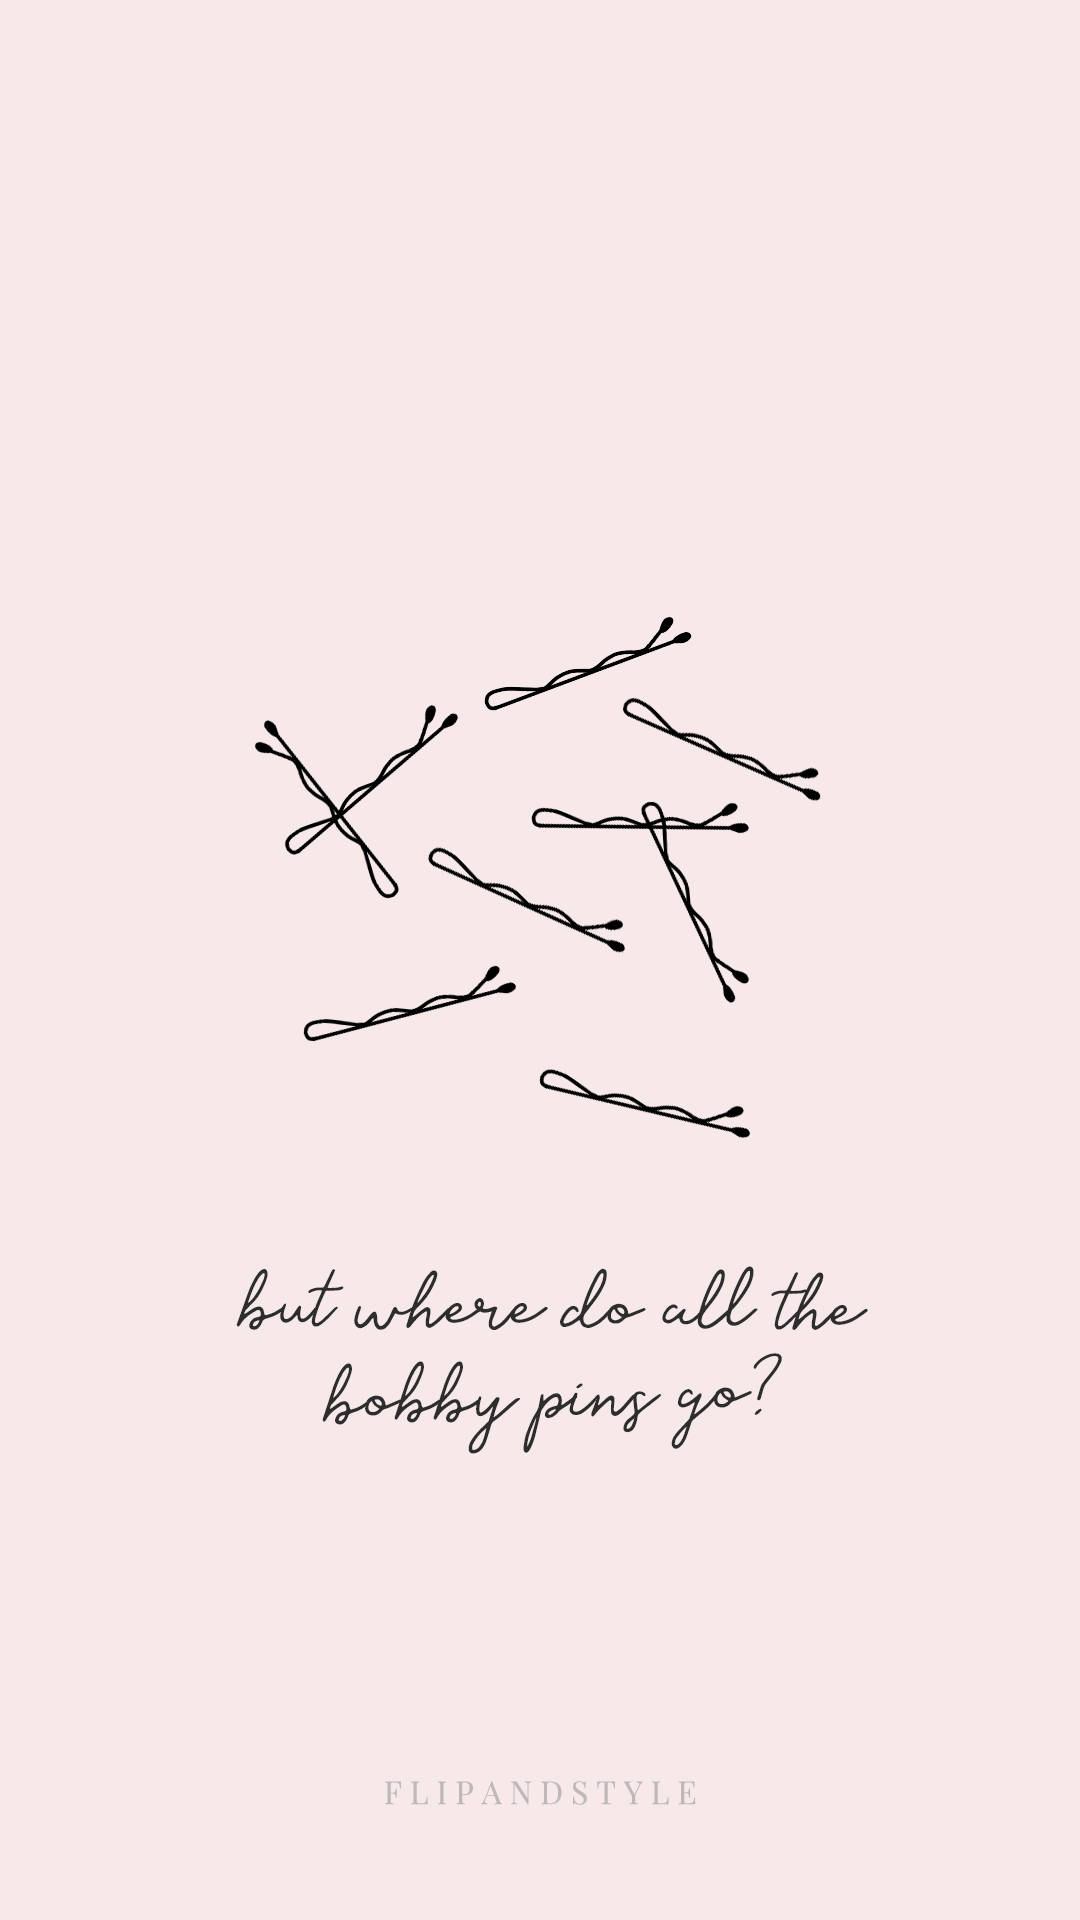 Cute Instagram With Bobby Pins Wallpaper